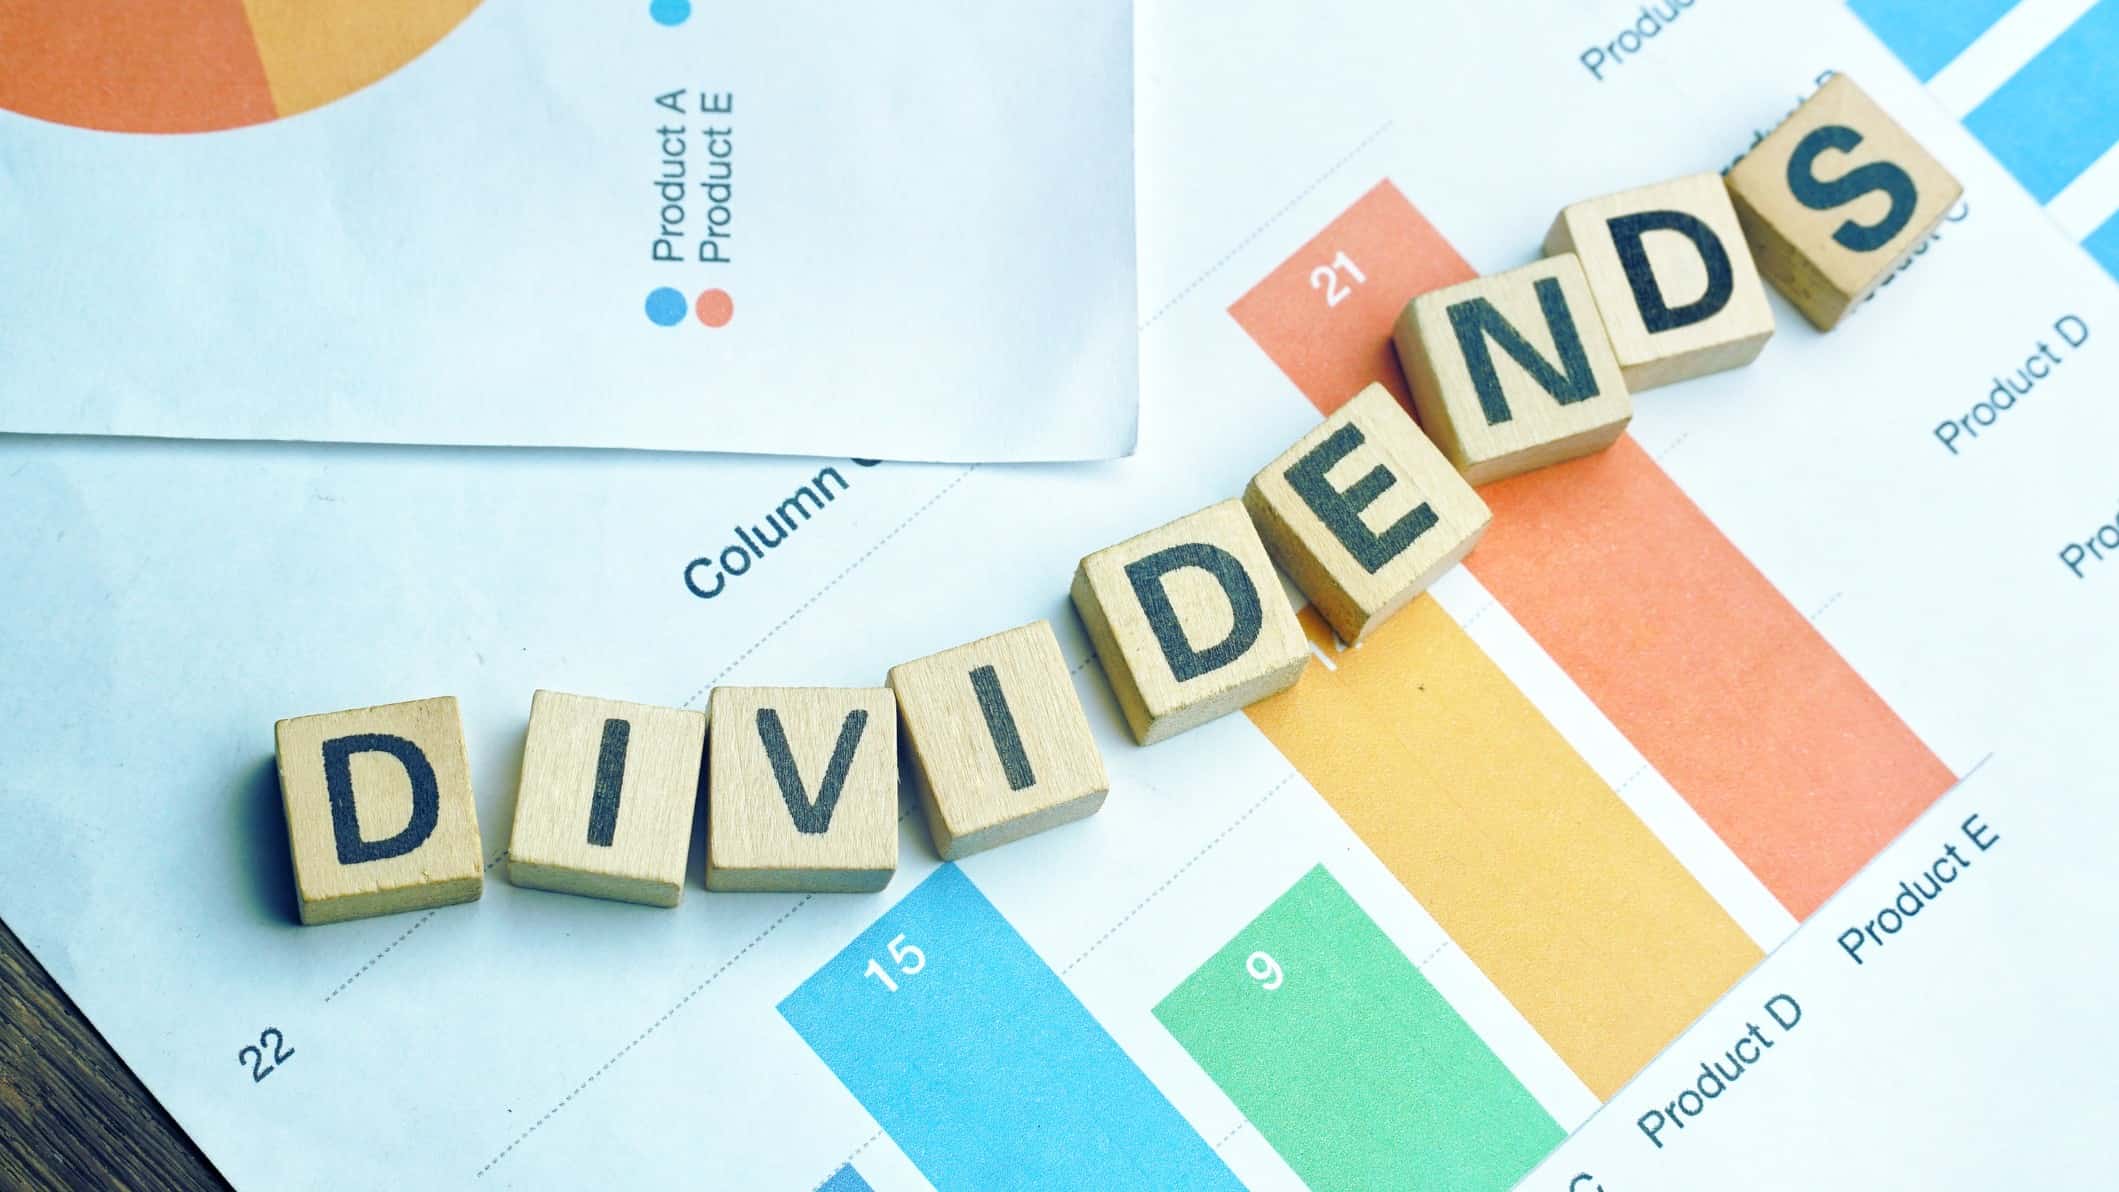 blockletters spelling dividends bank yield